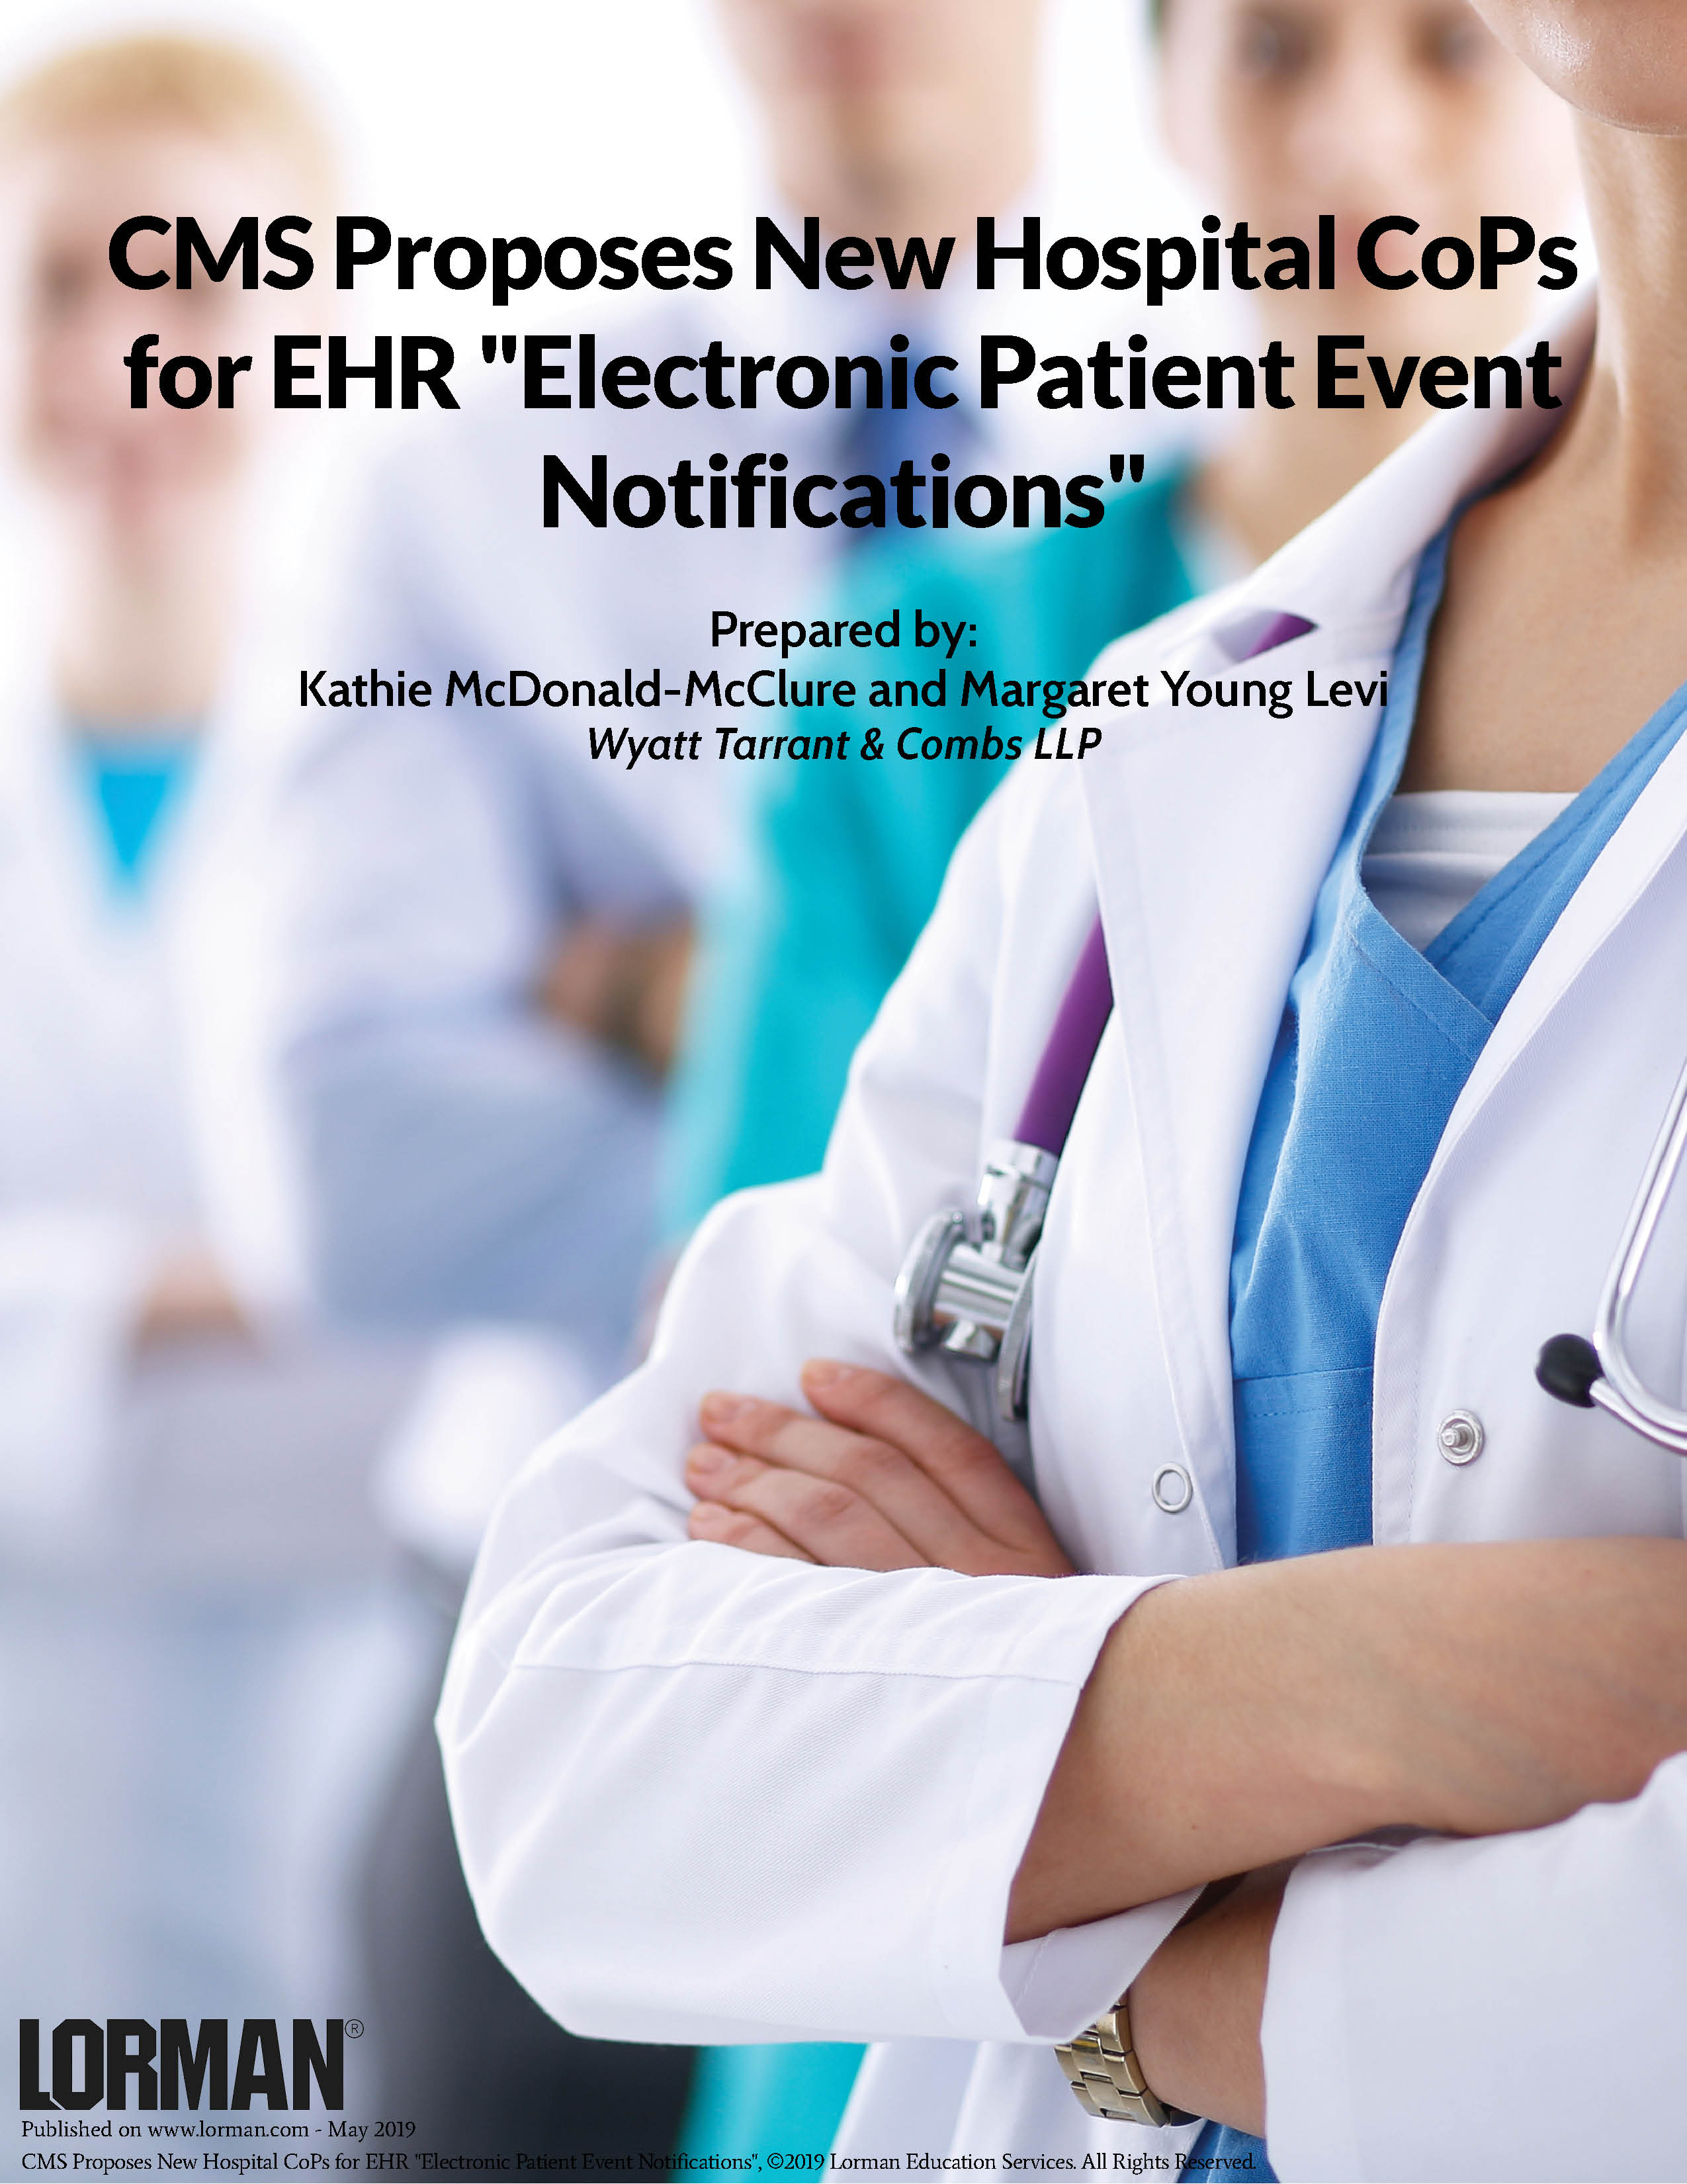 CMS Proposes New Hospital CoPs for EHR Electronic Patient Event Notifications